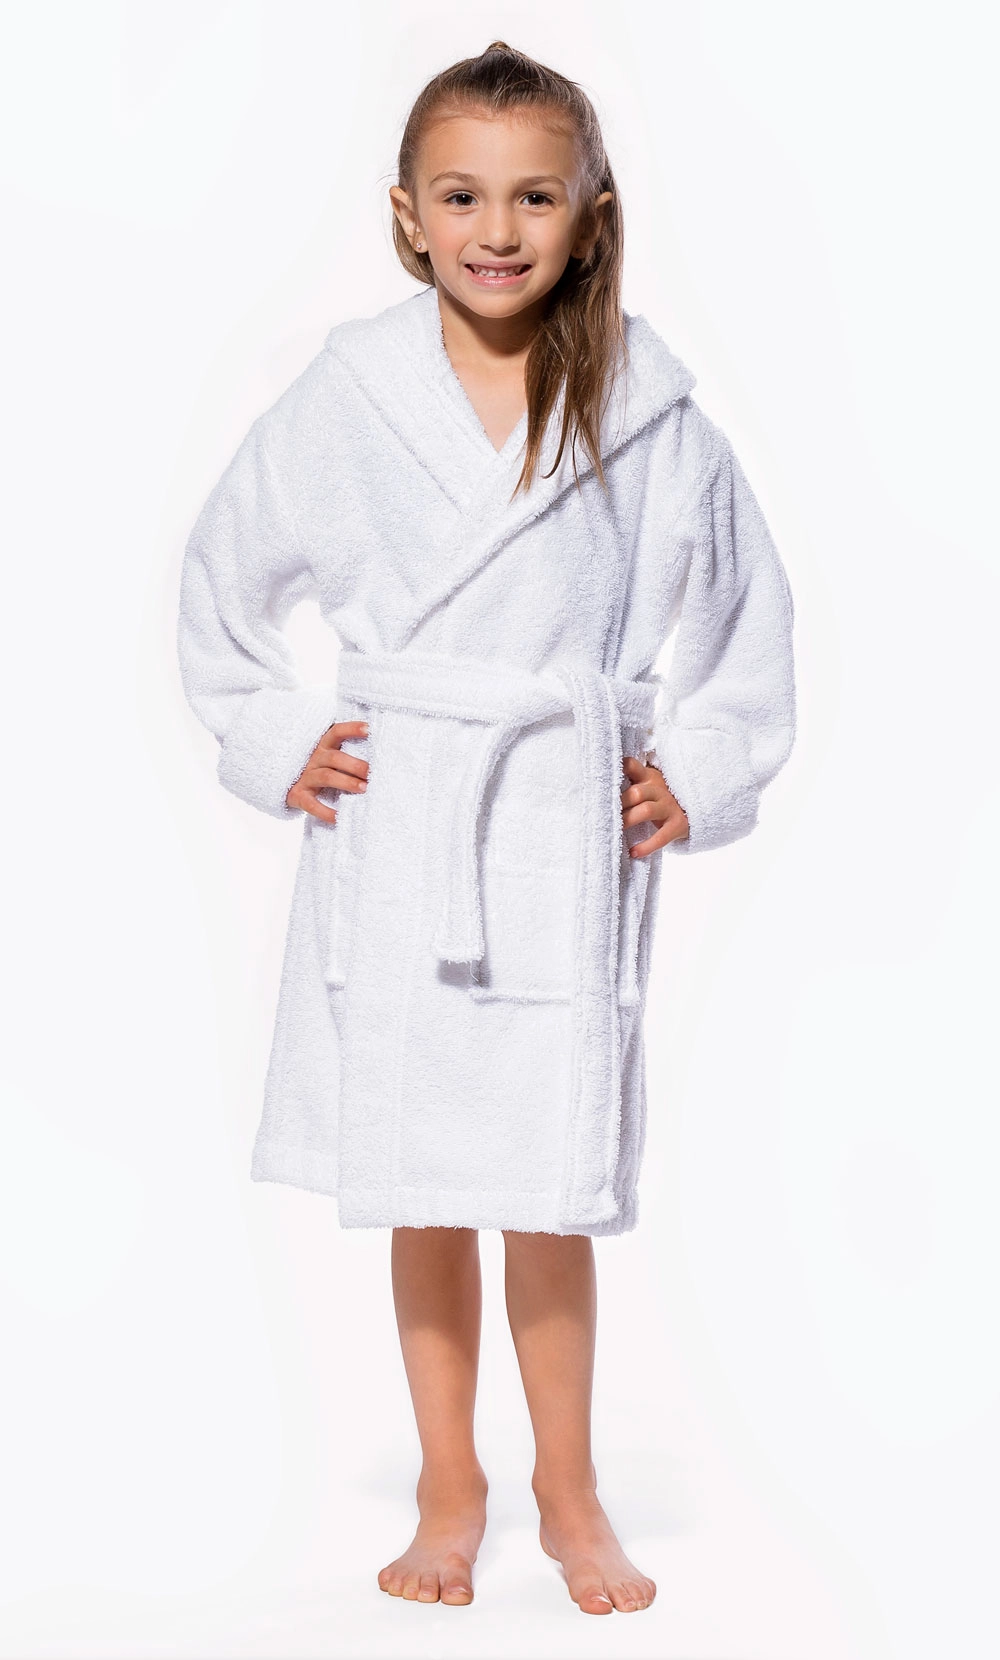 Terry Cloth Bathrobes for Women 100% Cotton Hooded Robes Soft